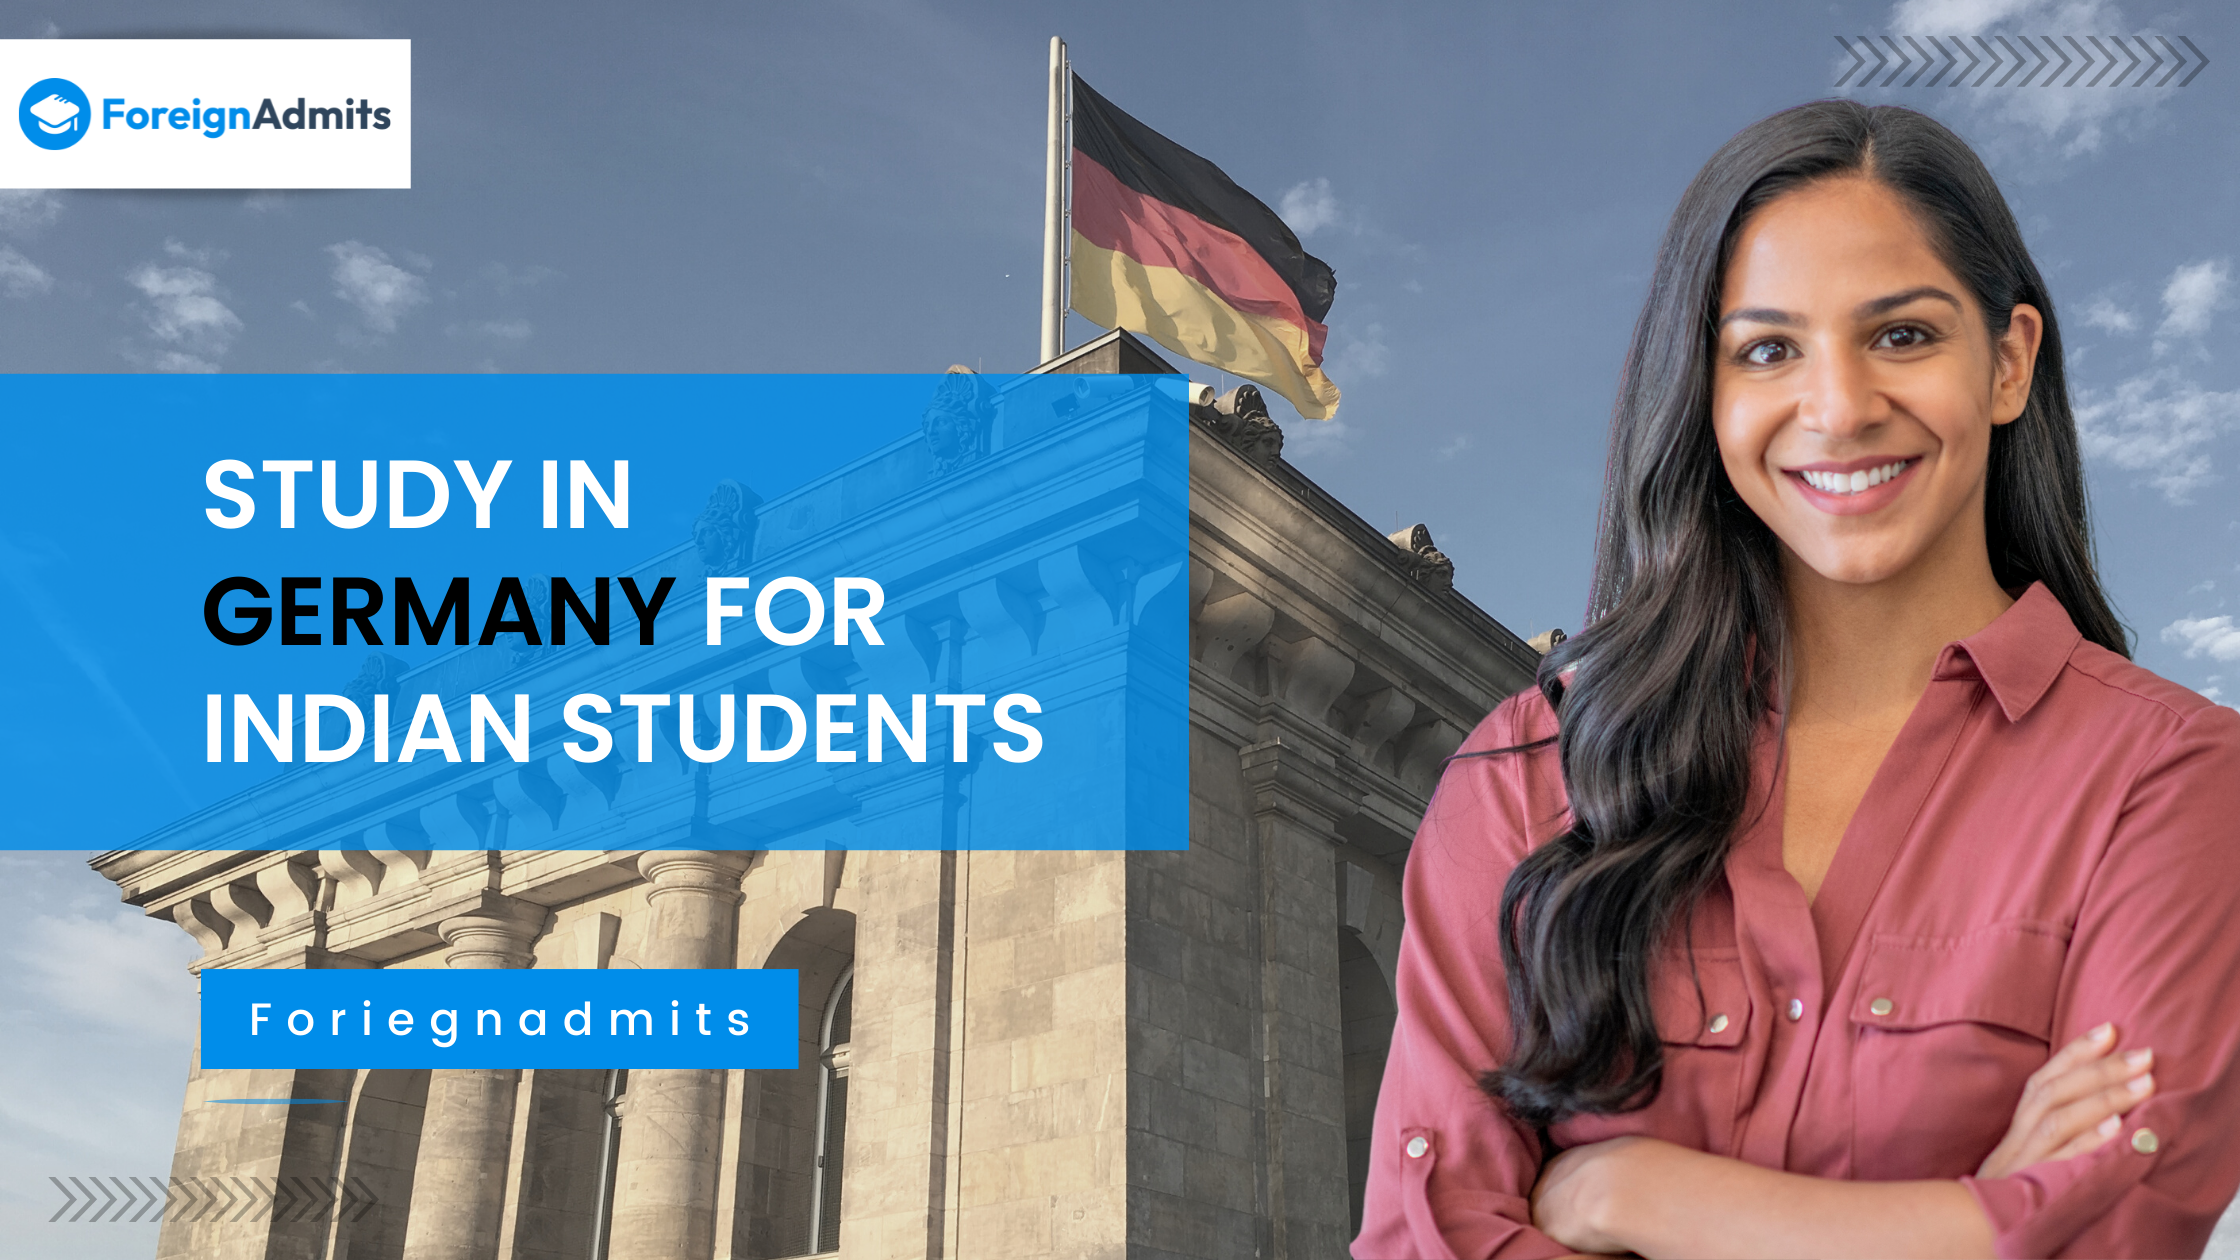 Study in Germany for Indian Students